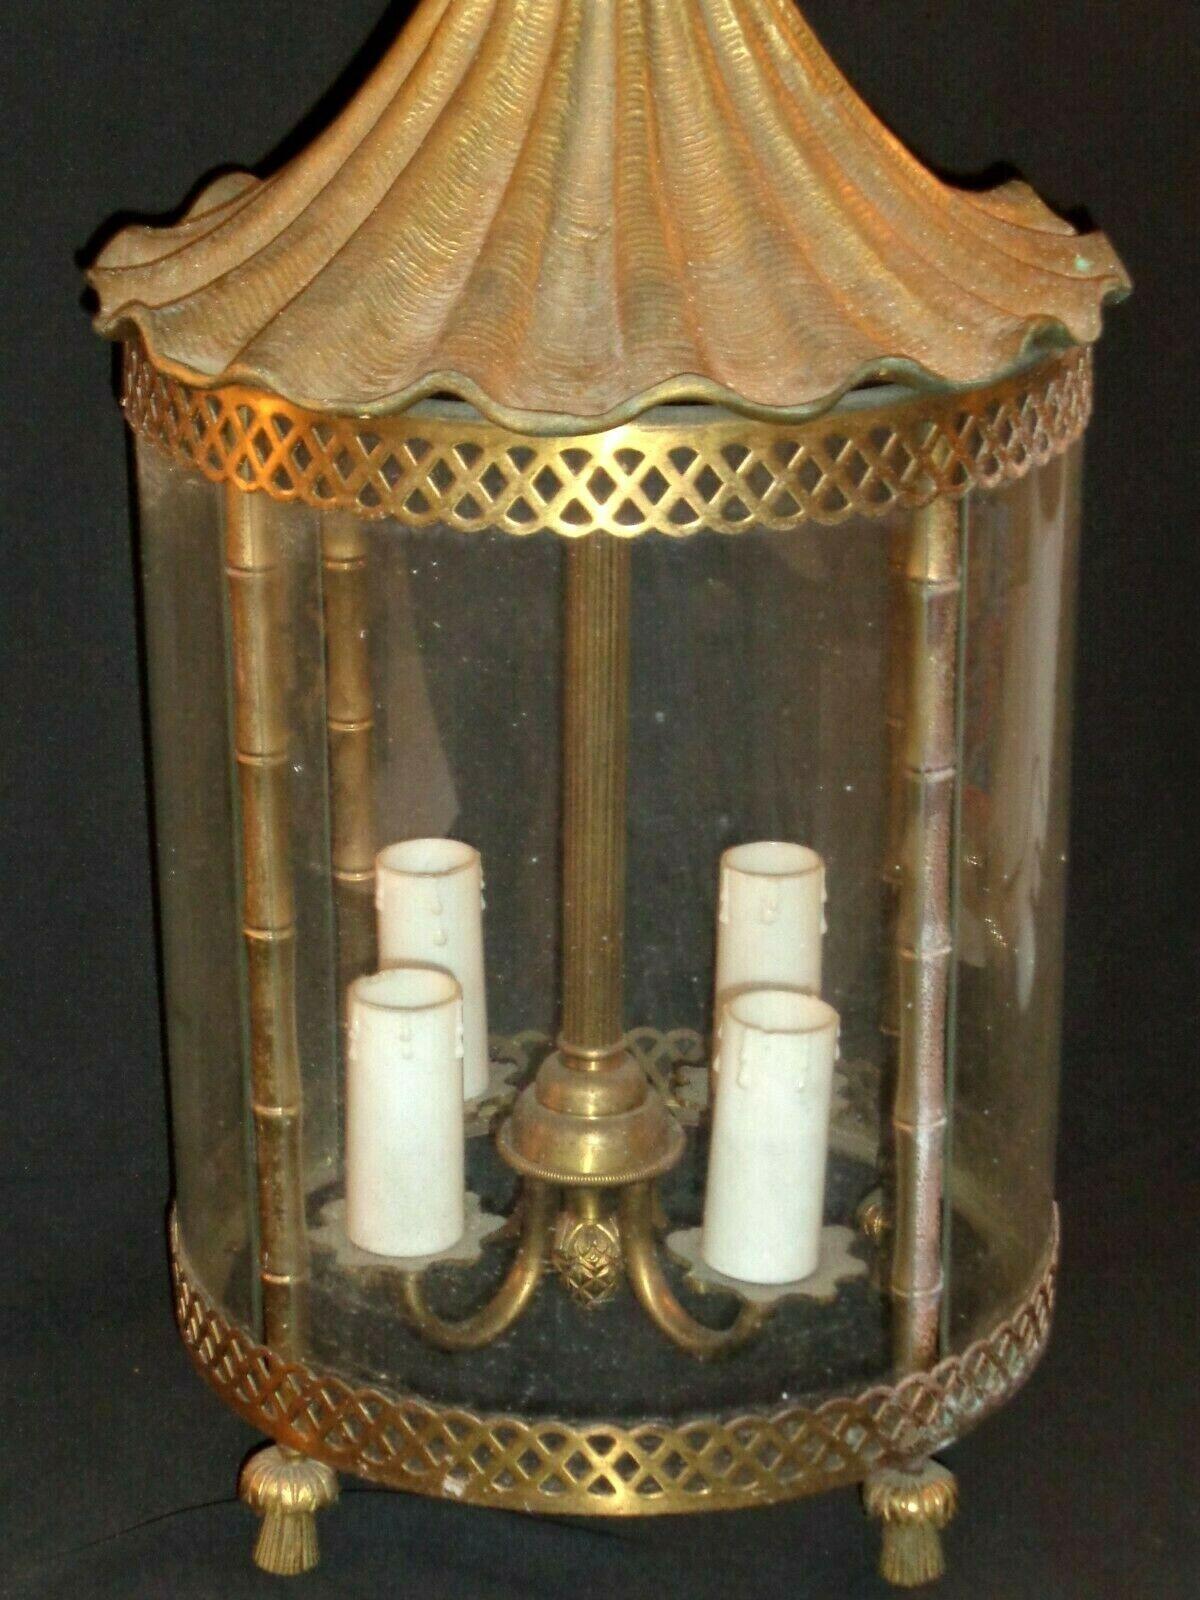 1950s Grand French Gilt Bronze 3 Light Pagoda style Lantern. One of the panes of glass is not present. French Chateau find. Manufactured by Maison Bagues. We could remove the other panes of glass and have this lantern open style with no glass.